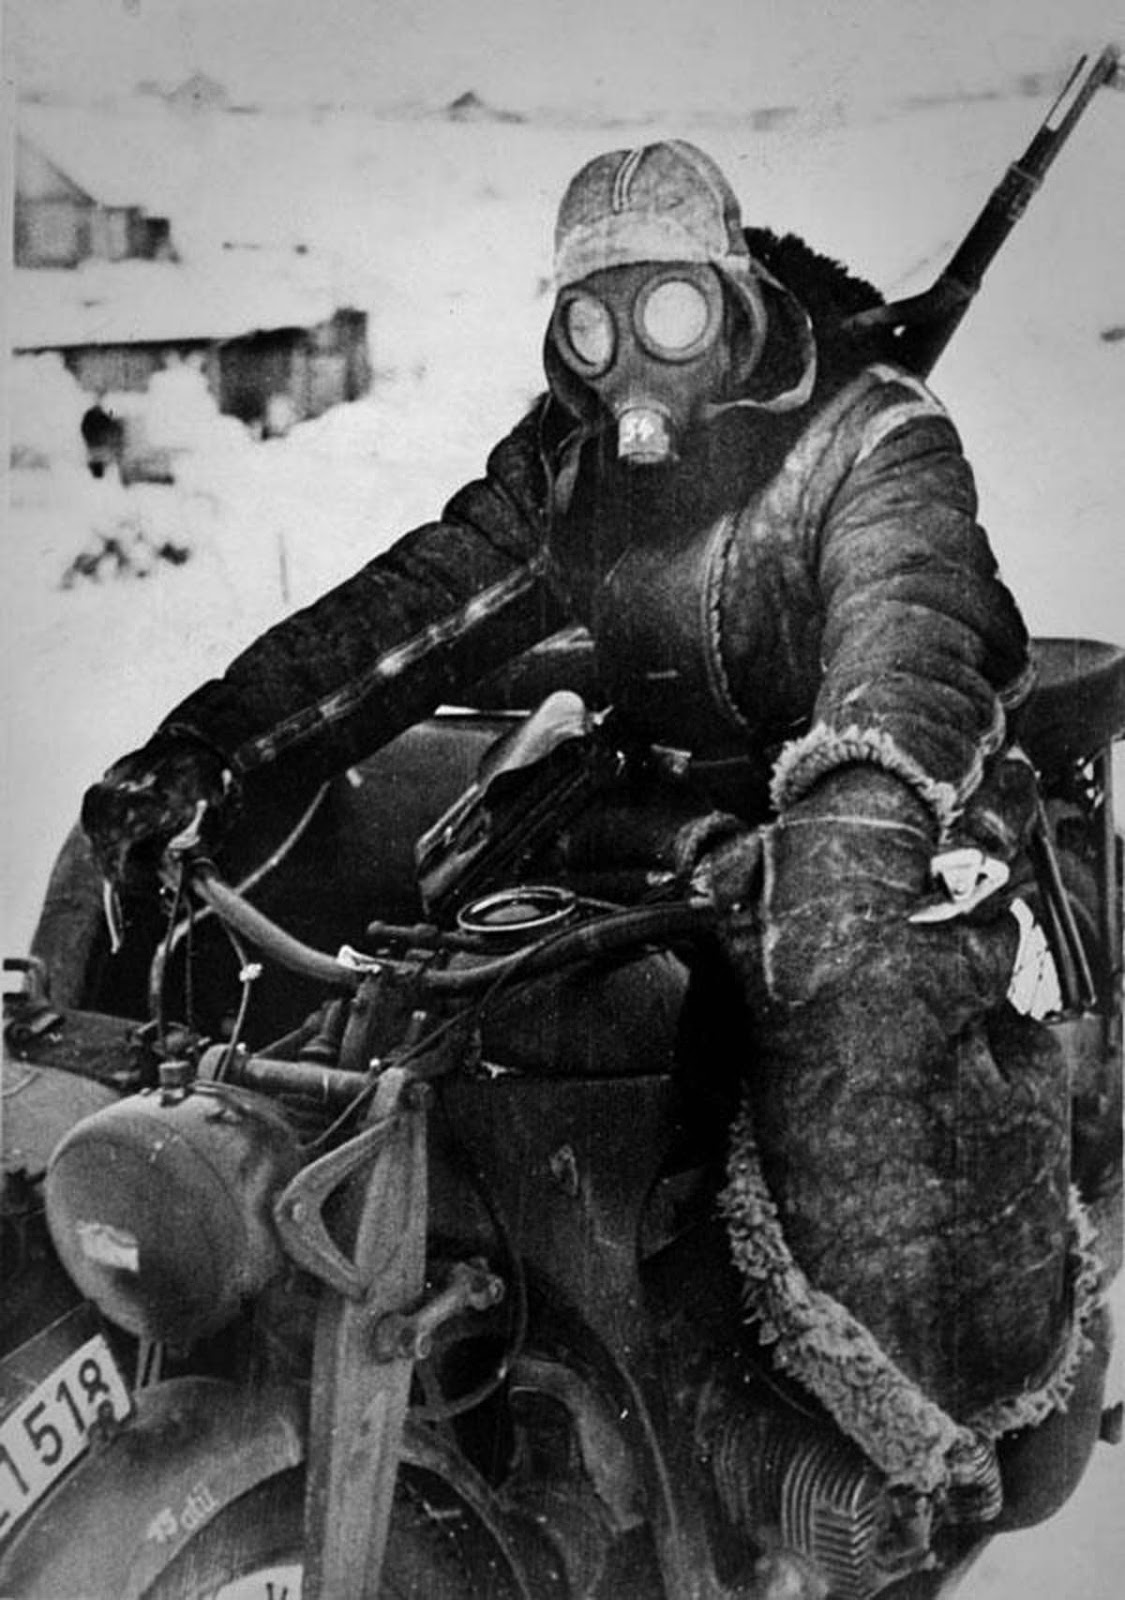 German motorcycle courier in Russia, 1942.